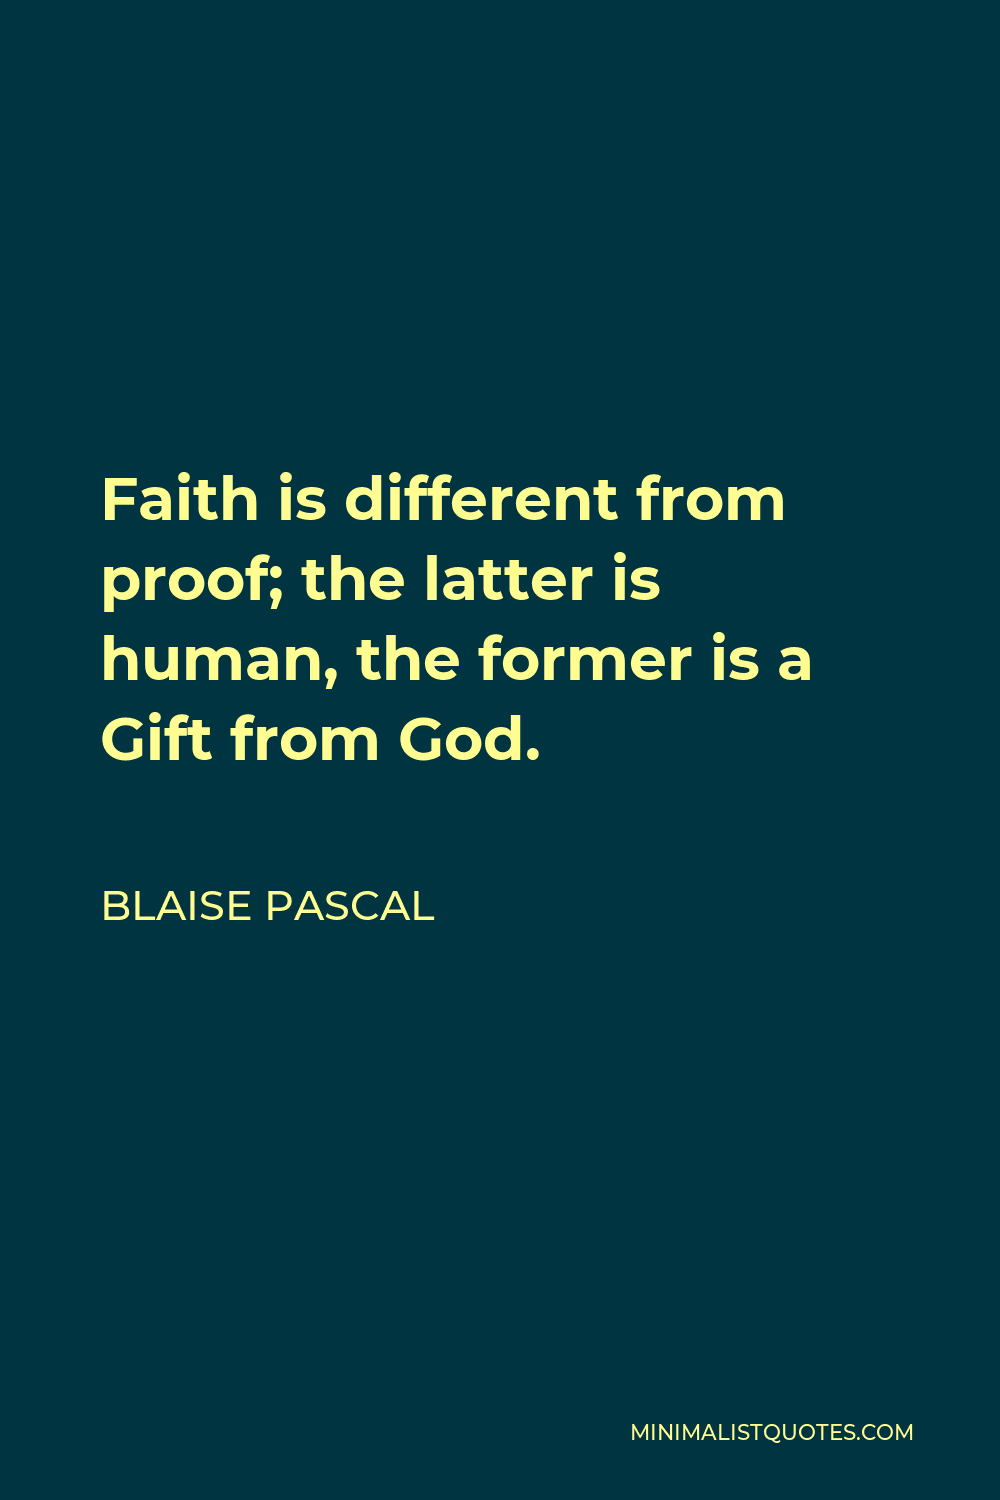 Blaise Pascal Quote - Faith is different from proof; the latter is human, the former is a Gift from God.